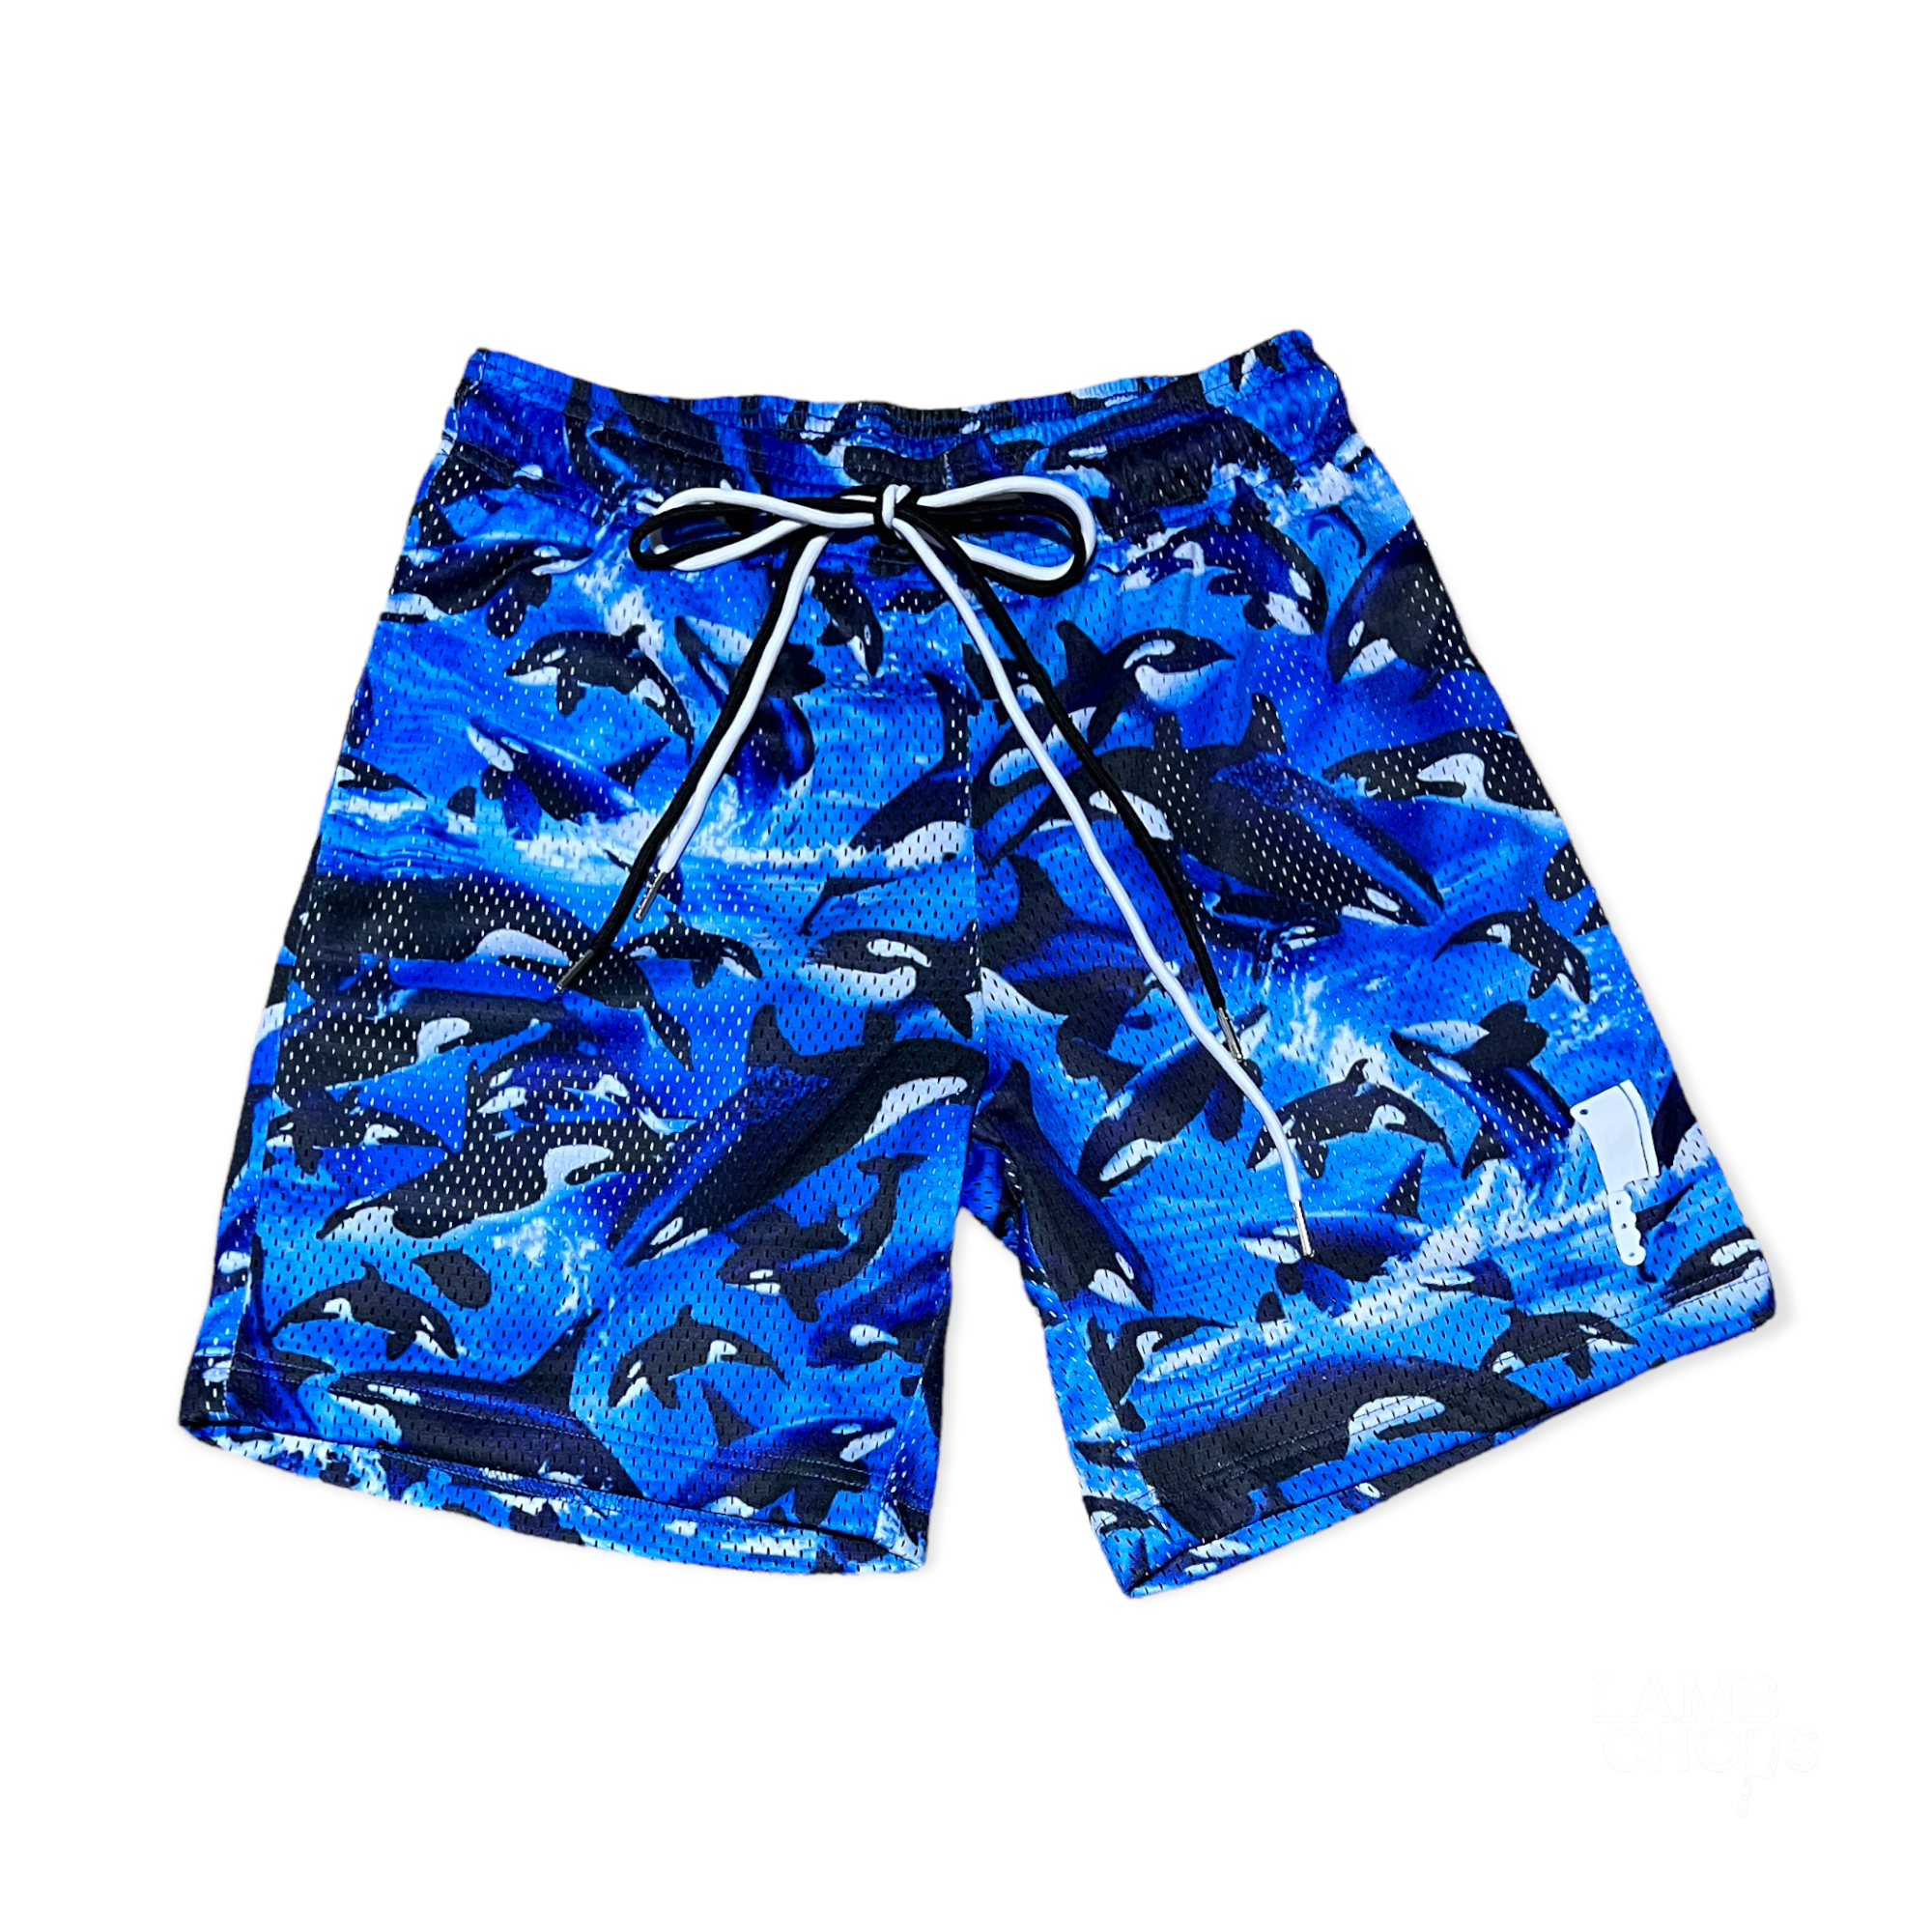 Orca Whale Cleaver Shorts